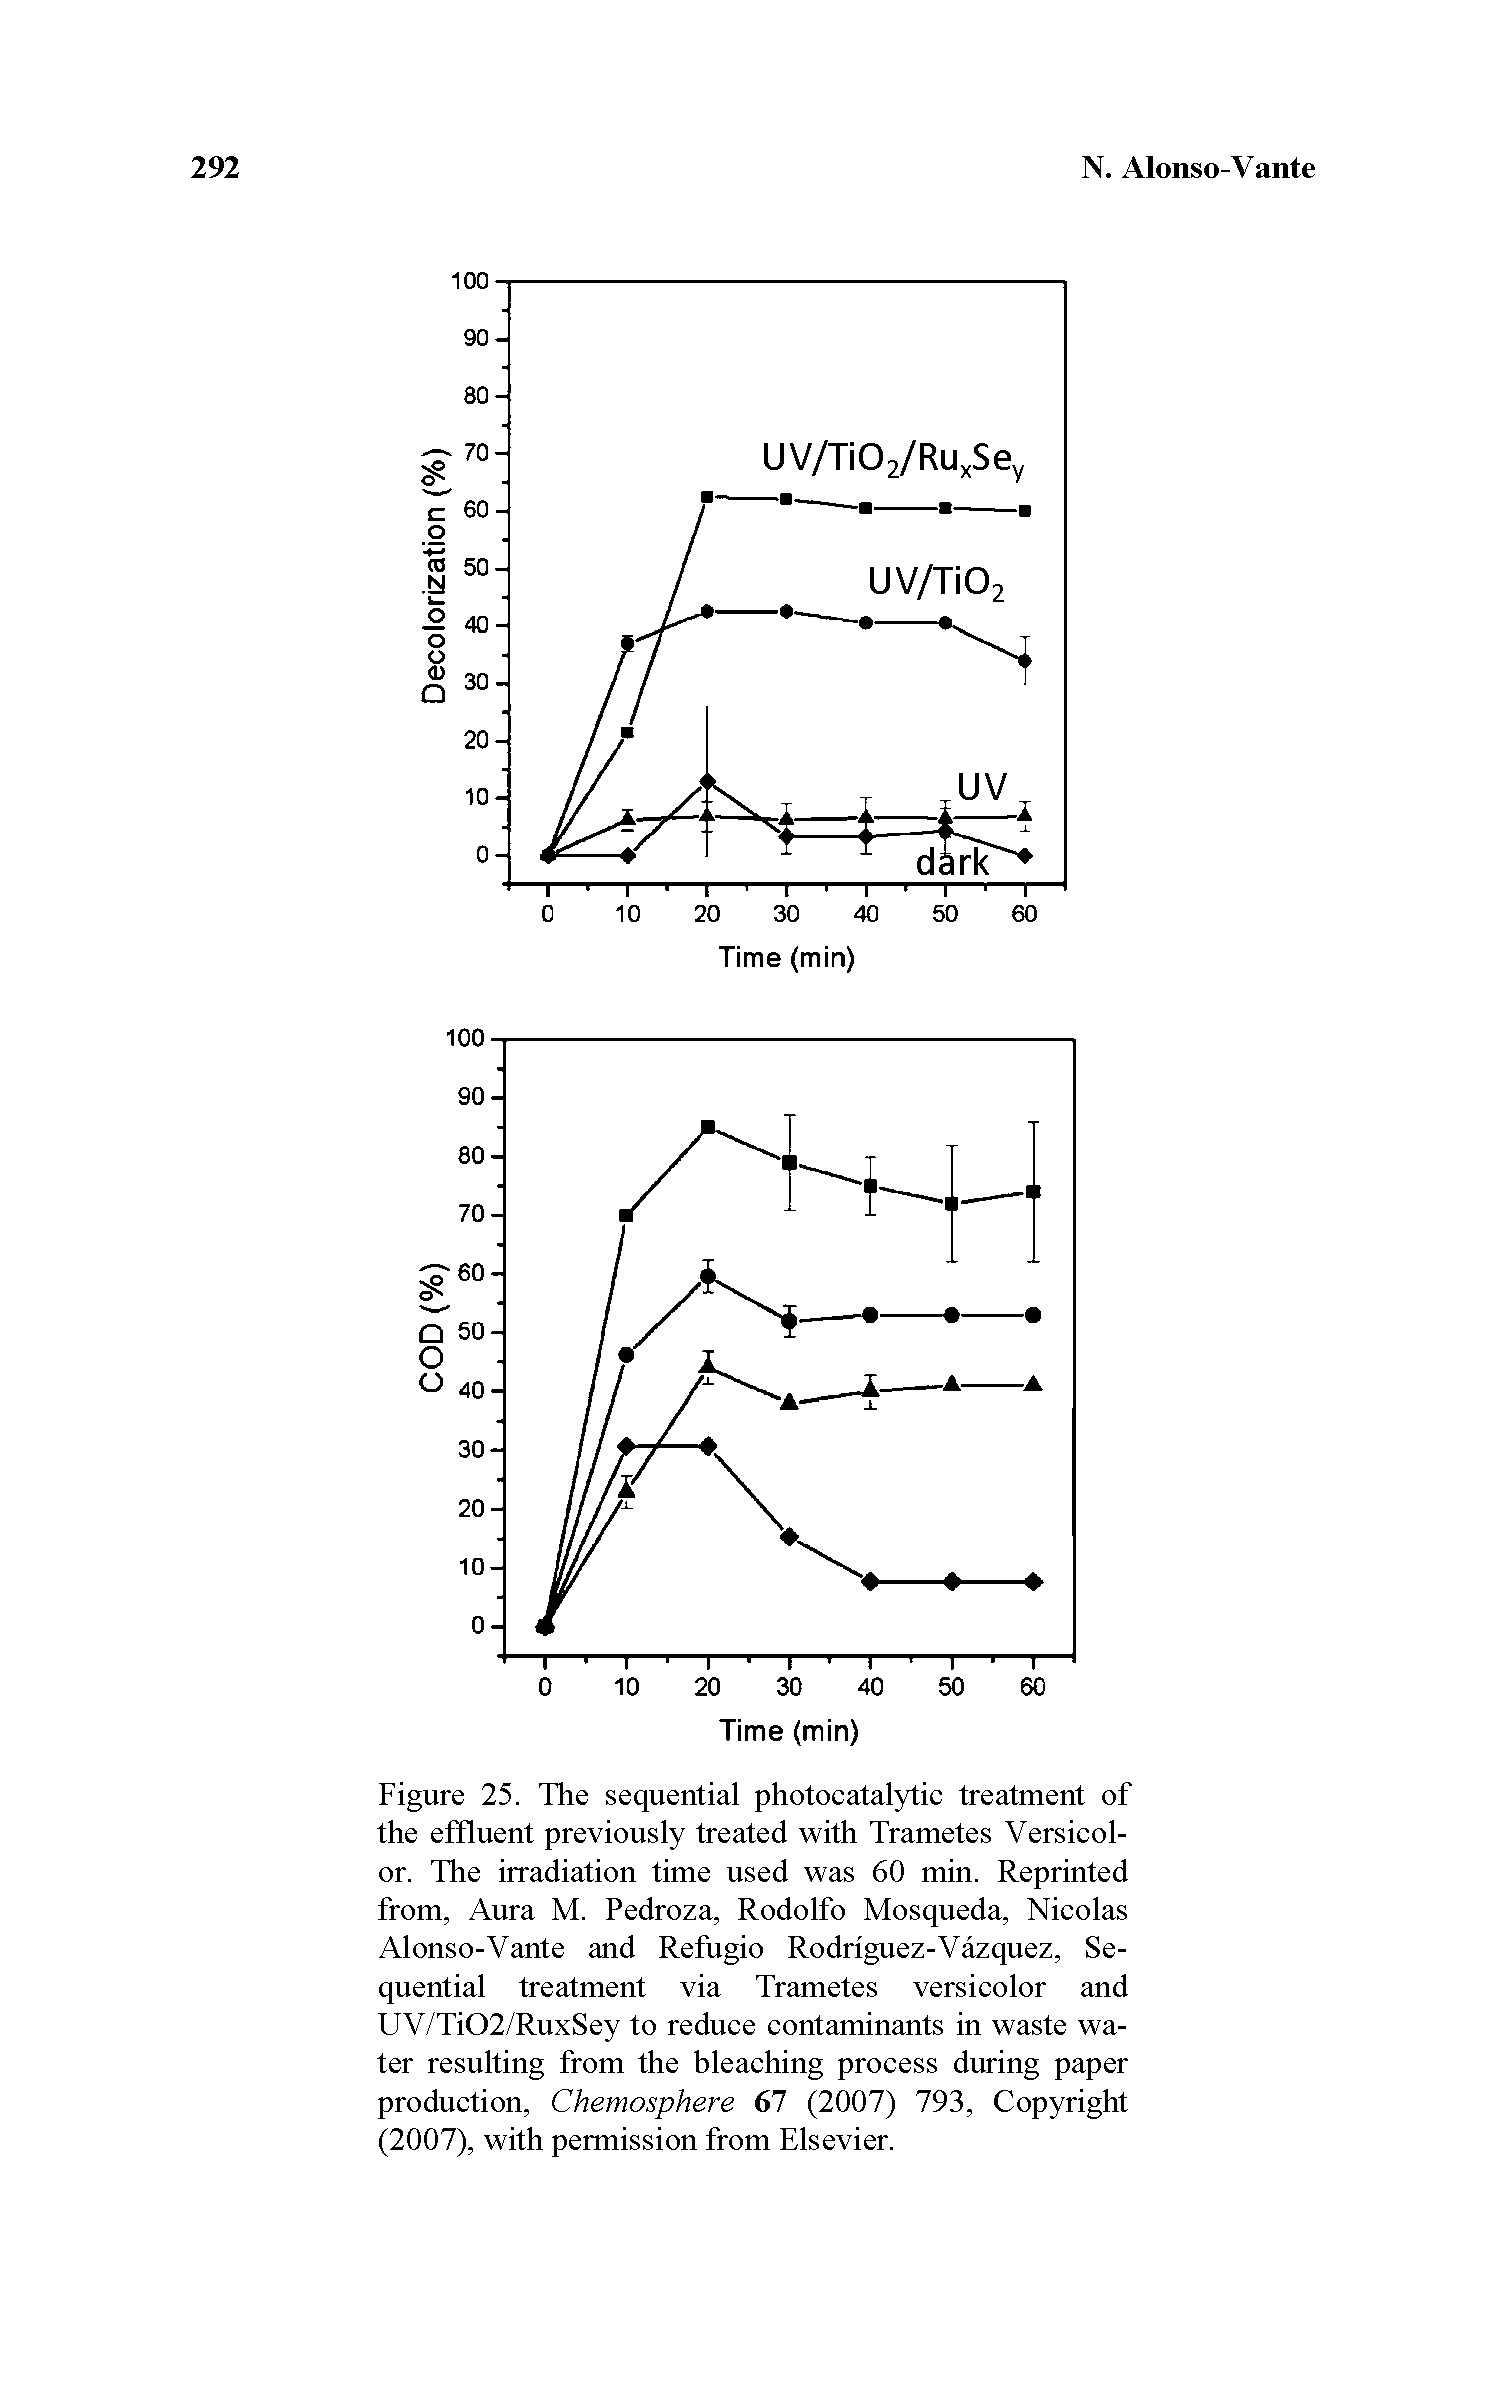 Figure 25. The sequential photocatalytic treatment of the effluent previously treated with Trametes Versicolor. The irradiation time used was 60 min. Reprinted from, Aura M. Pedroza, Rodolfo Mosqueda, Nicolas Alonso-Vante and Refugio Rodriguez-Vazquez, Sequential treatment via Trametes versicolor and UV/Ti02/RuxSey to reduce contaminants in waste water resulting from the bleaching process during paper production, Chemosphere 67 (2007) 793, Copyright (2007), with permission from Elsevier.